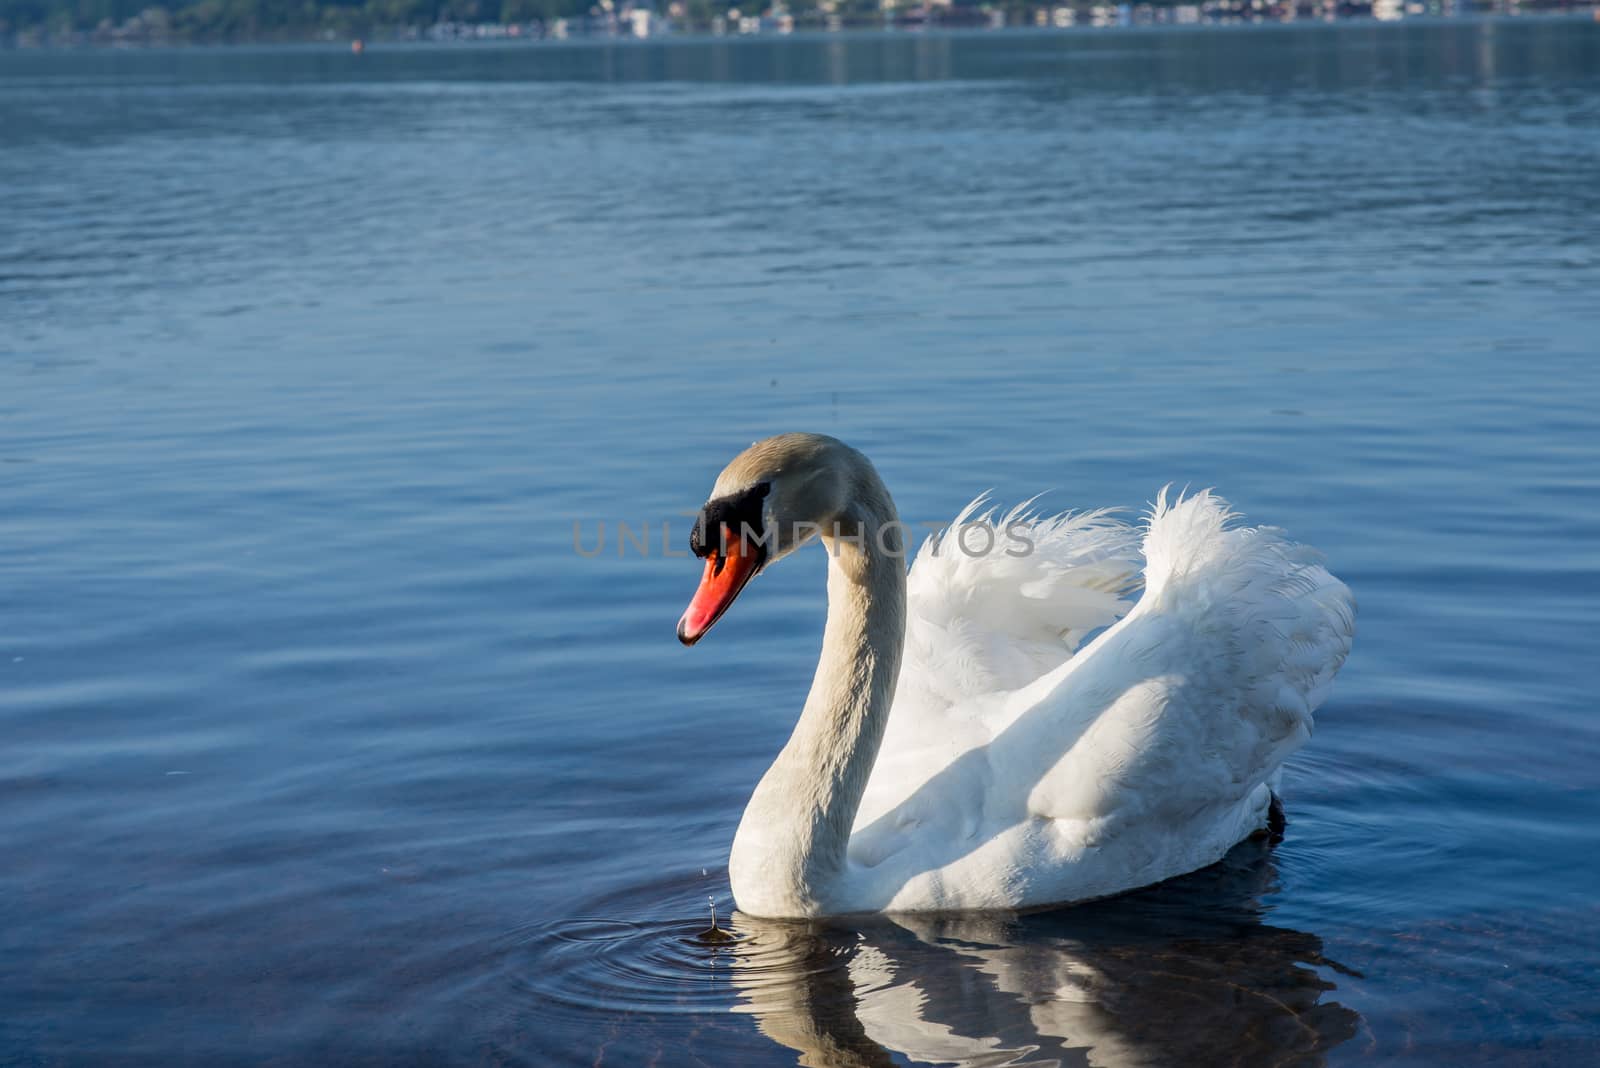 White Swans on the lake by chanwity